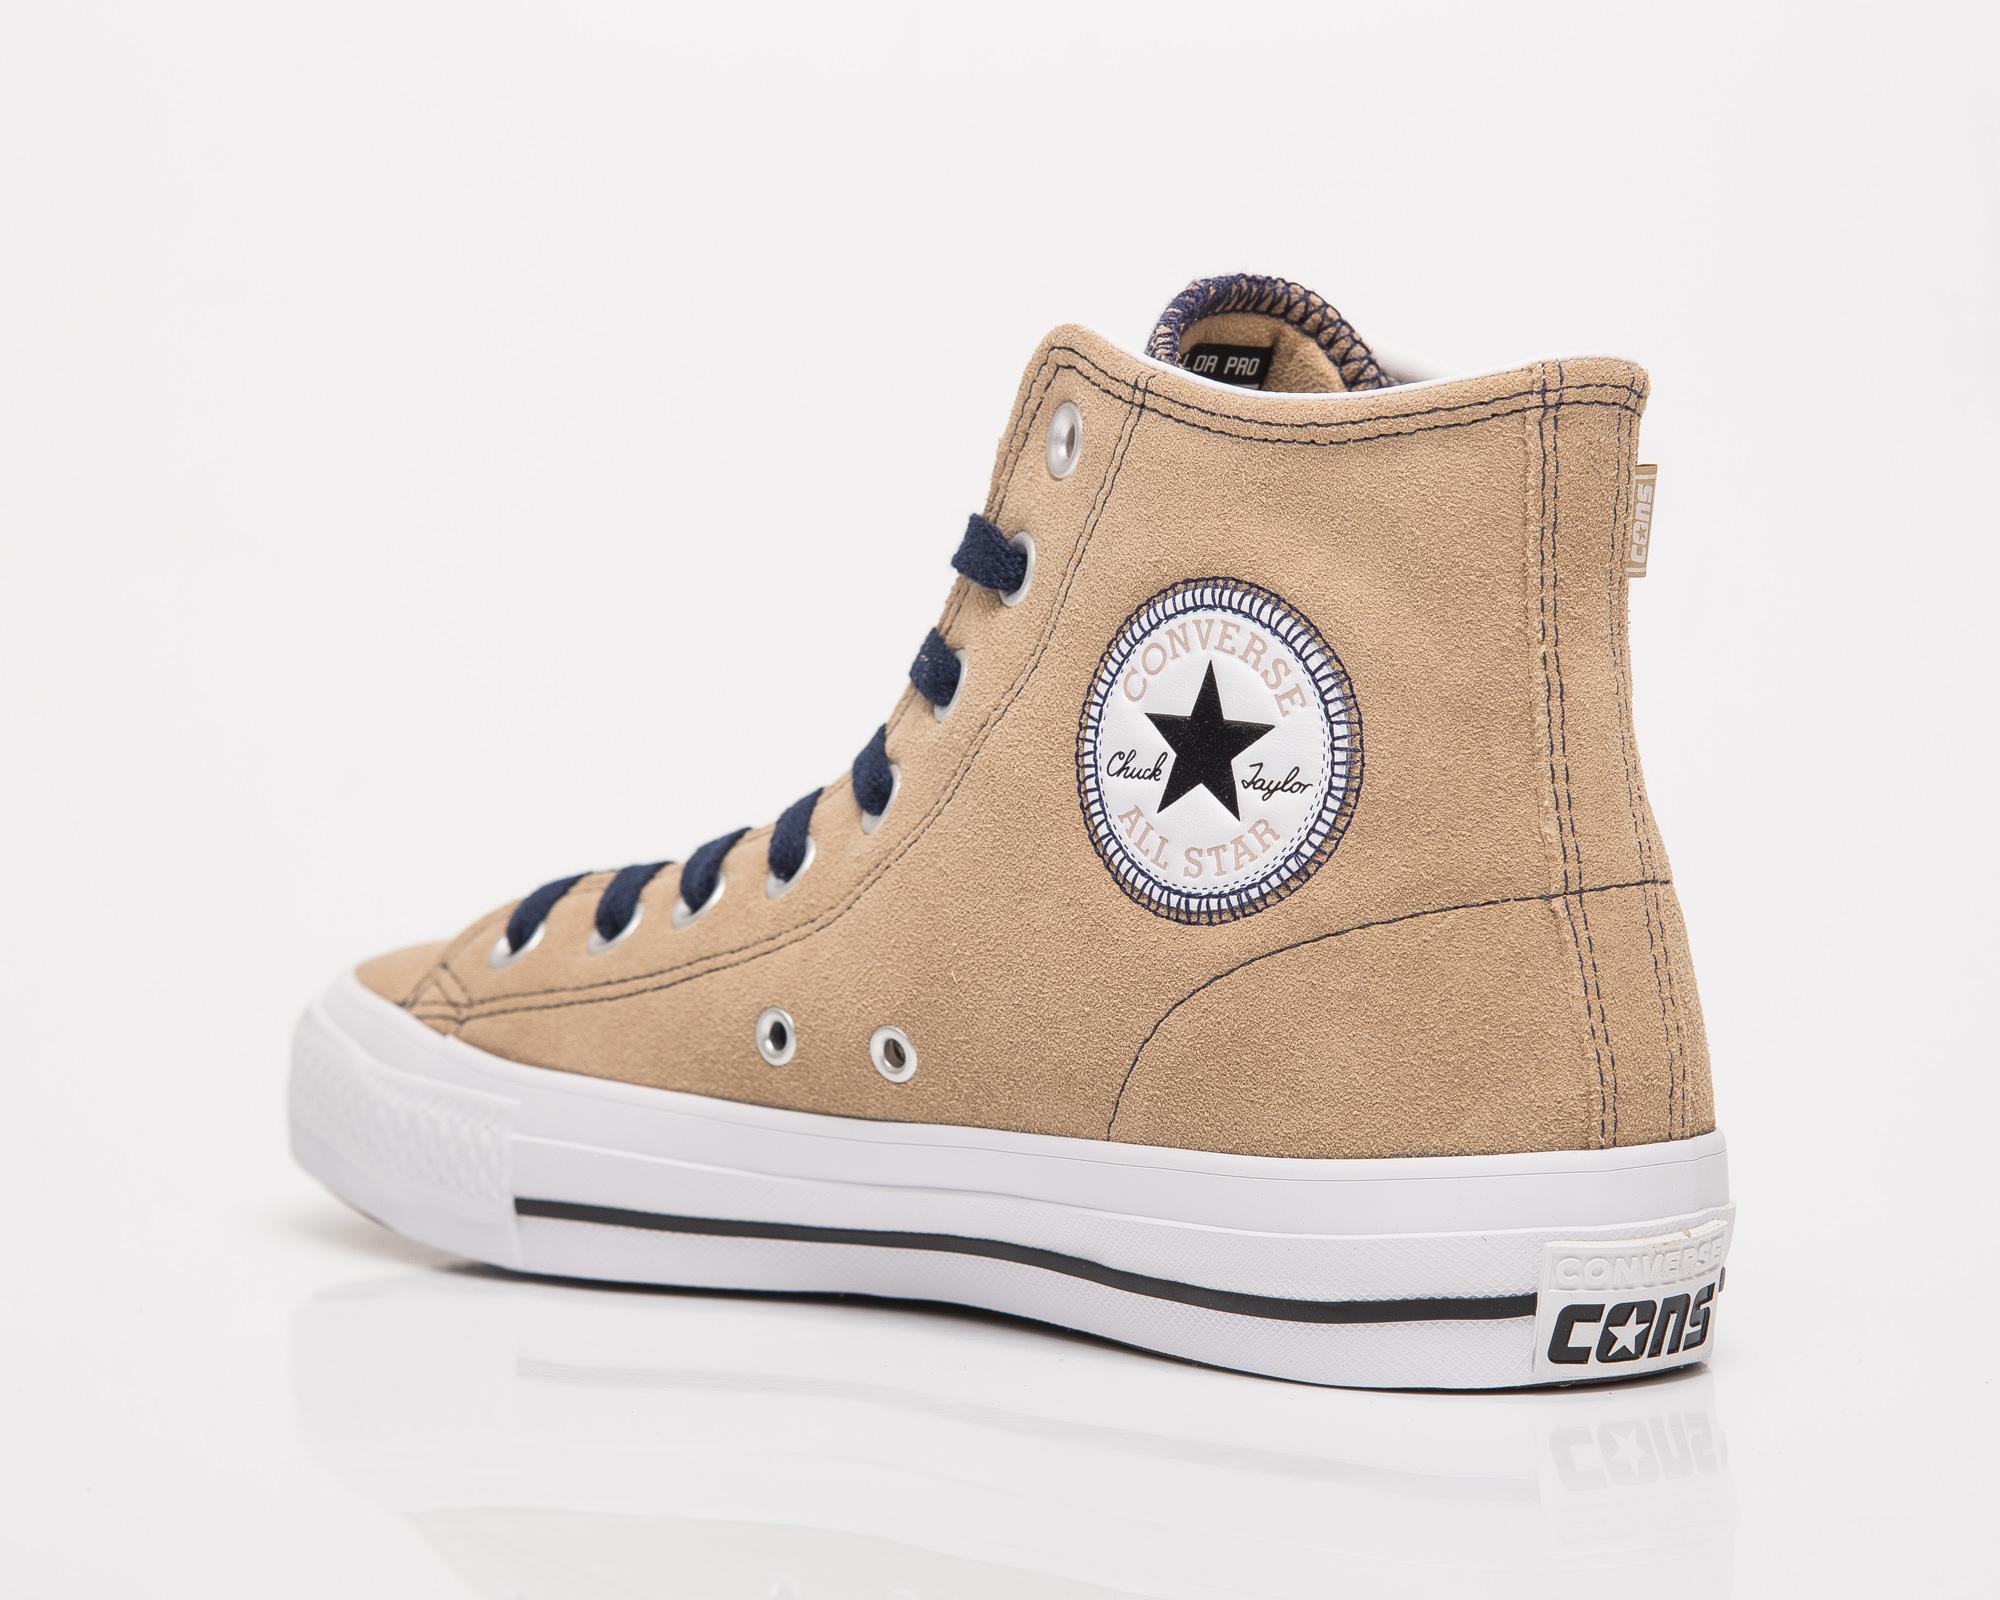 Converse Cons Chuck Taylor All Star Pro High Suede for Men | Lyst